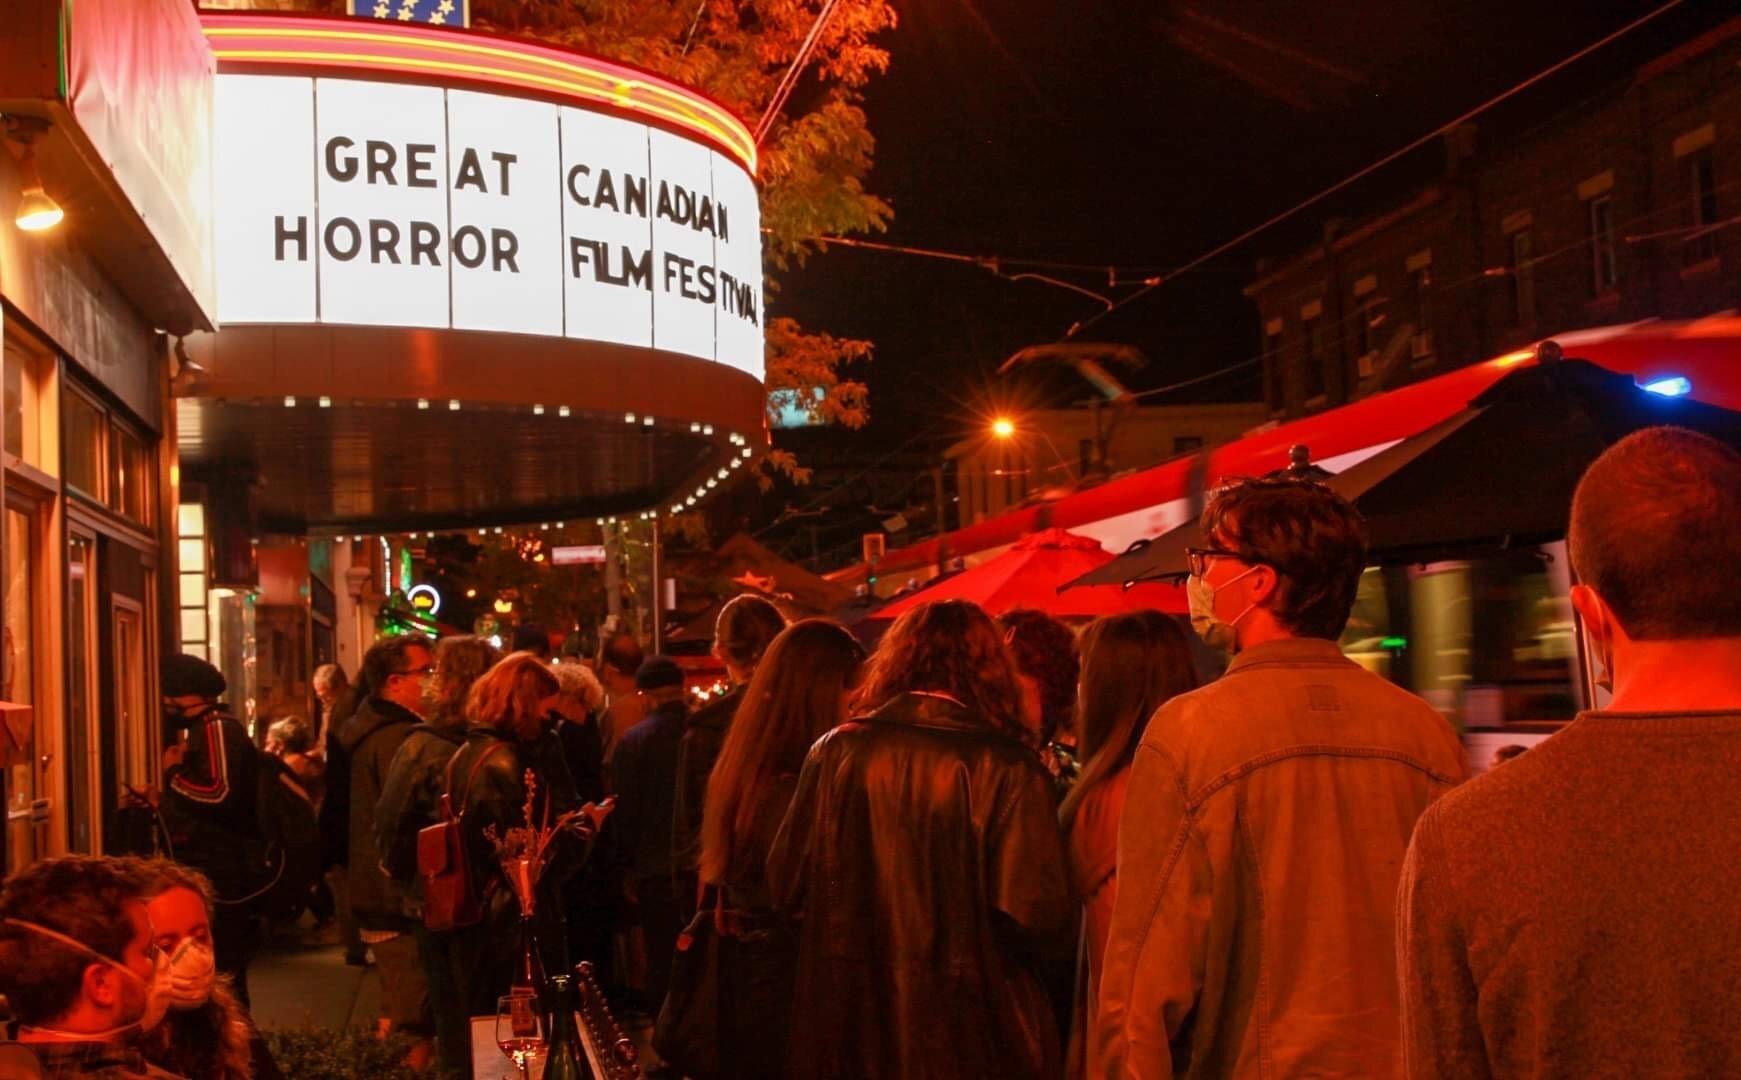 Movie goers pass by the Great Canadian Horror Film Festival during the pandemic.